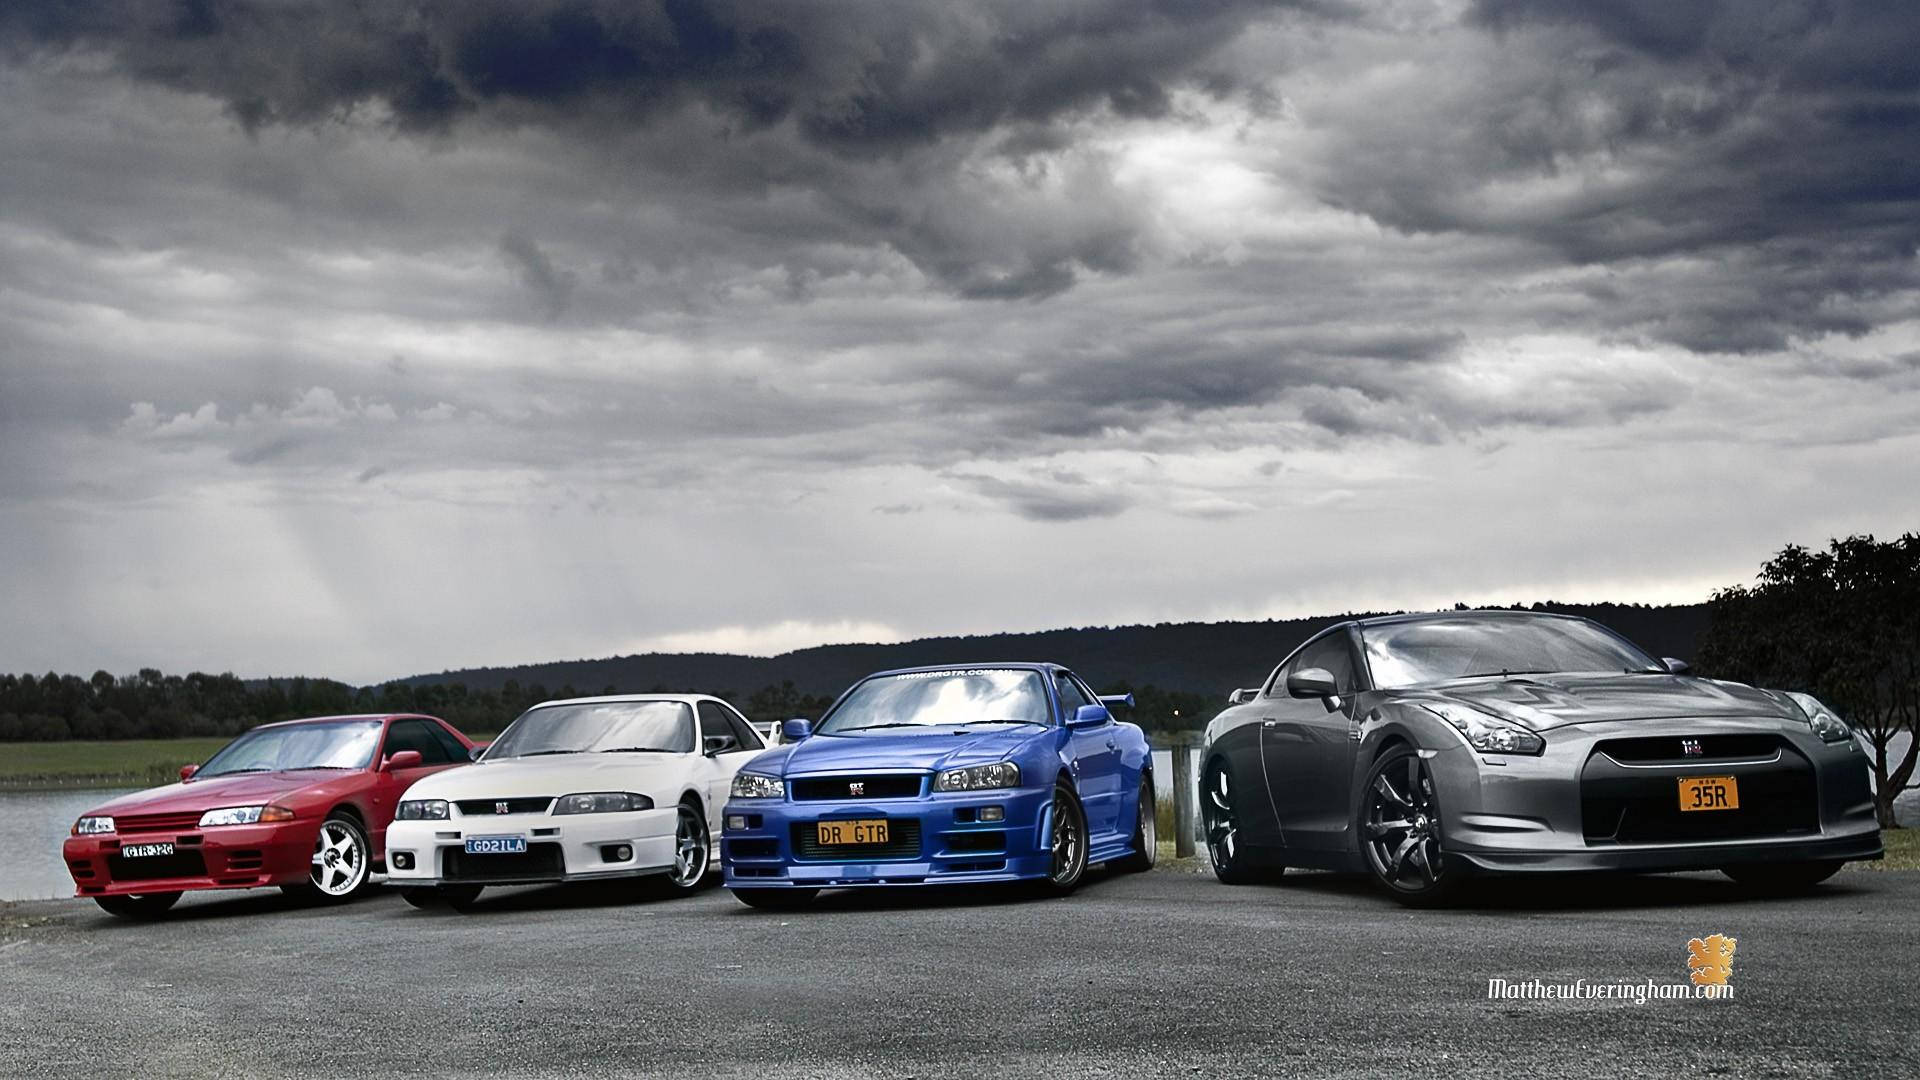 A display of illustrious JDM performance cars against a cloudy sky Wallpaper